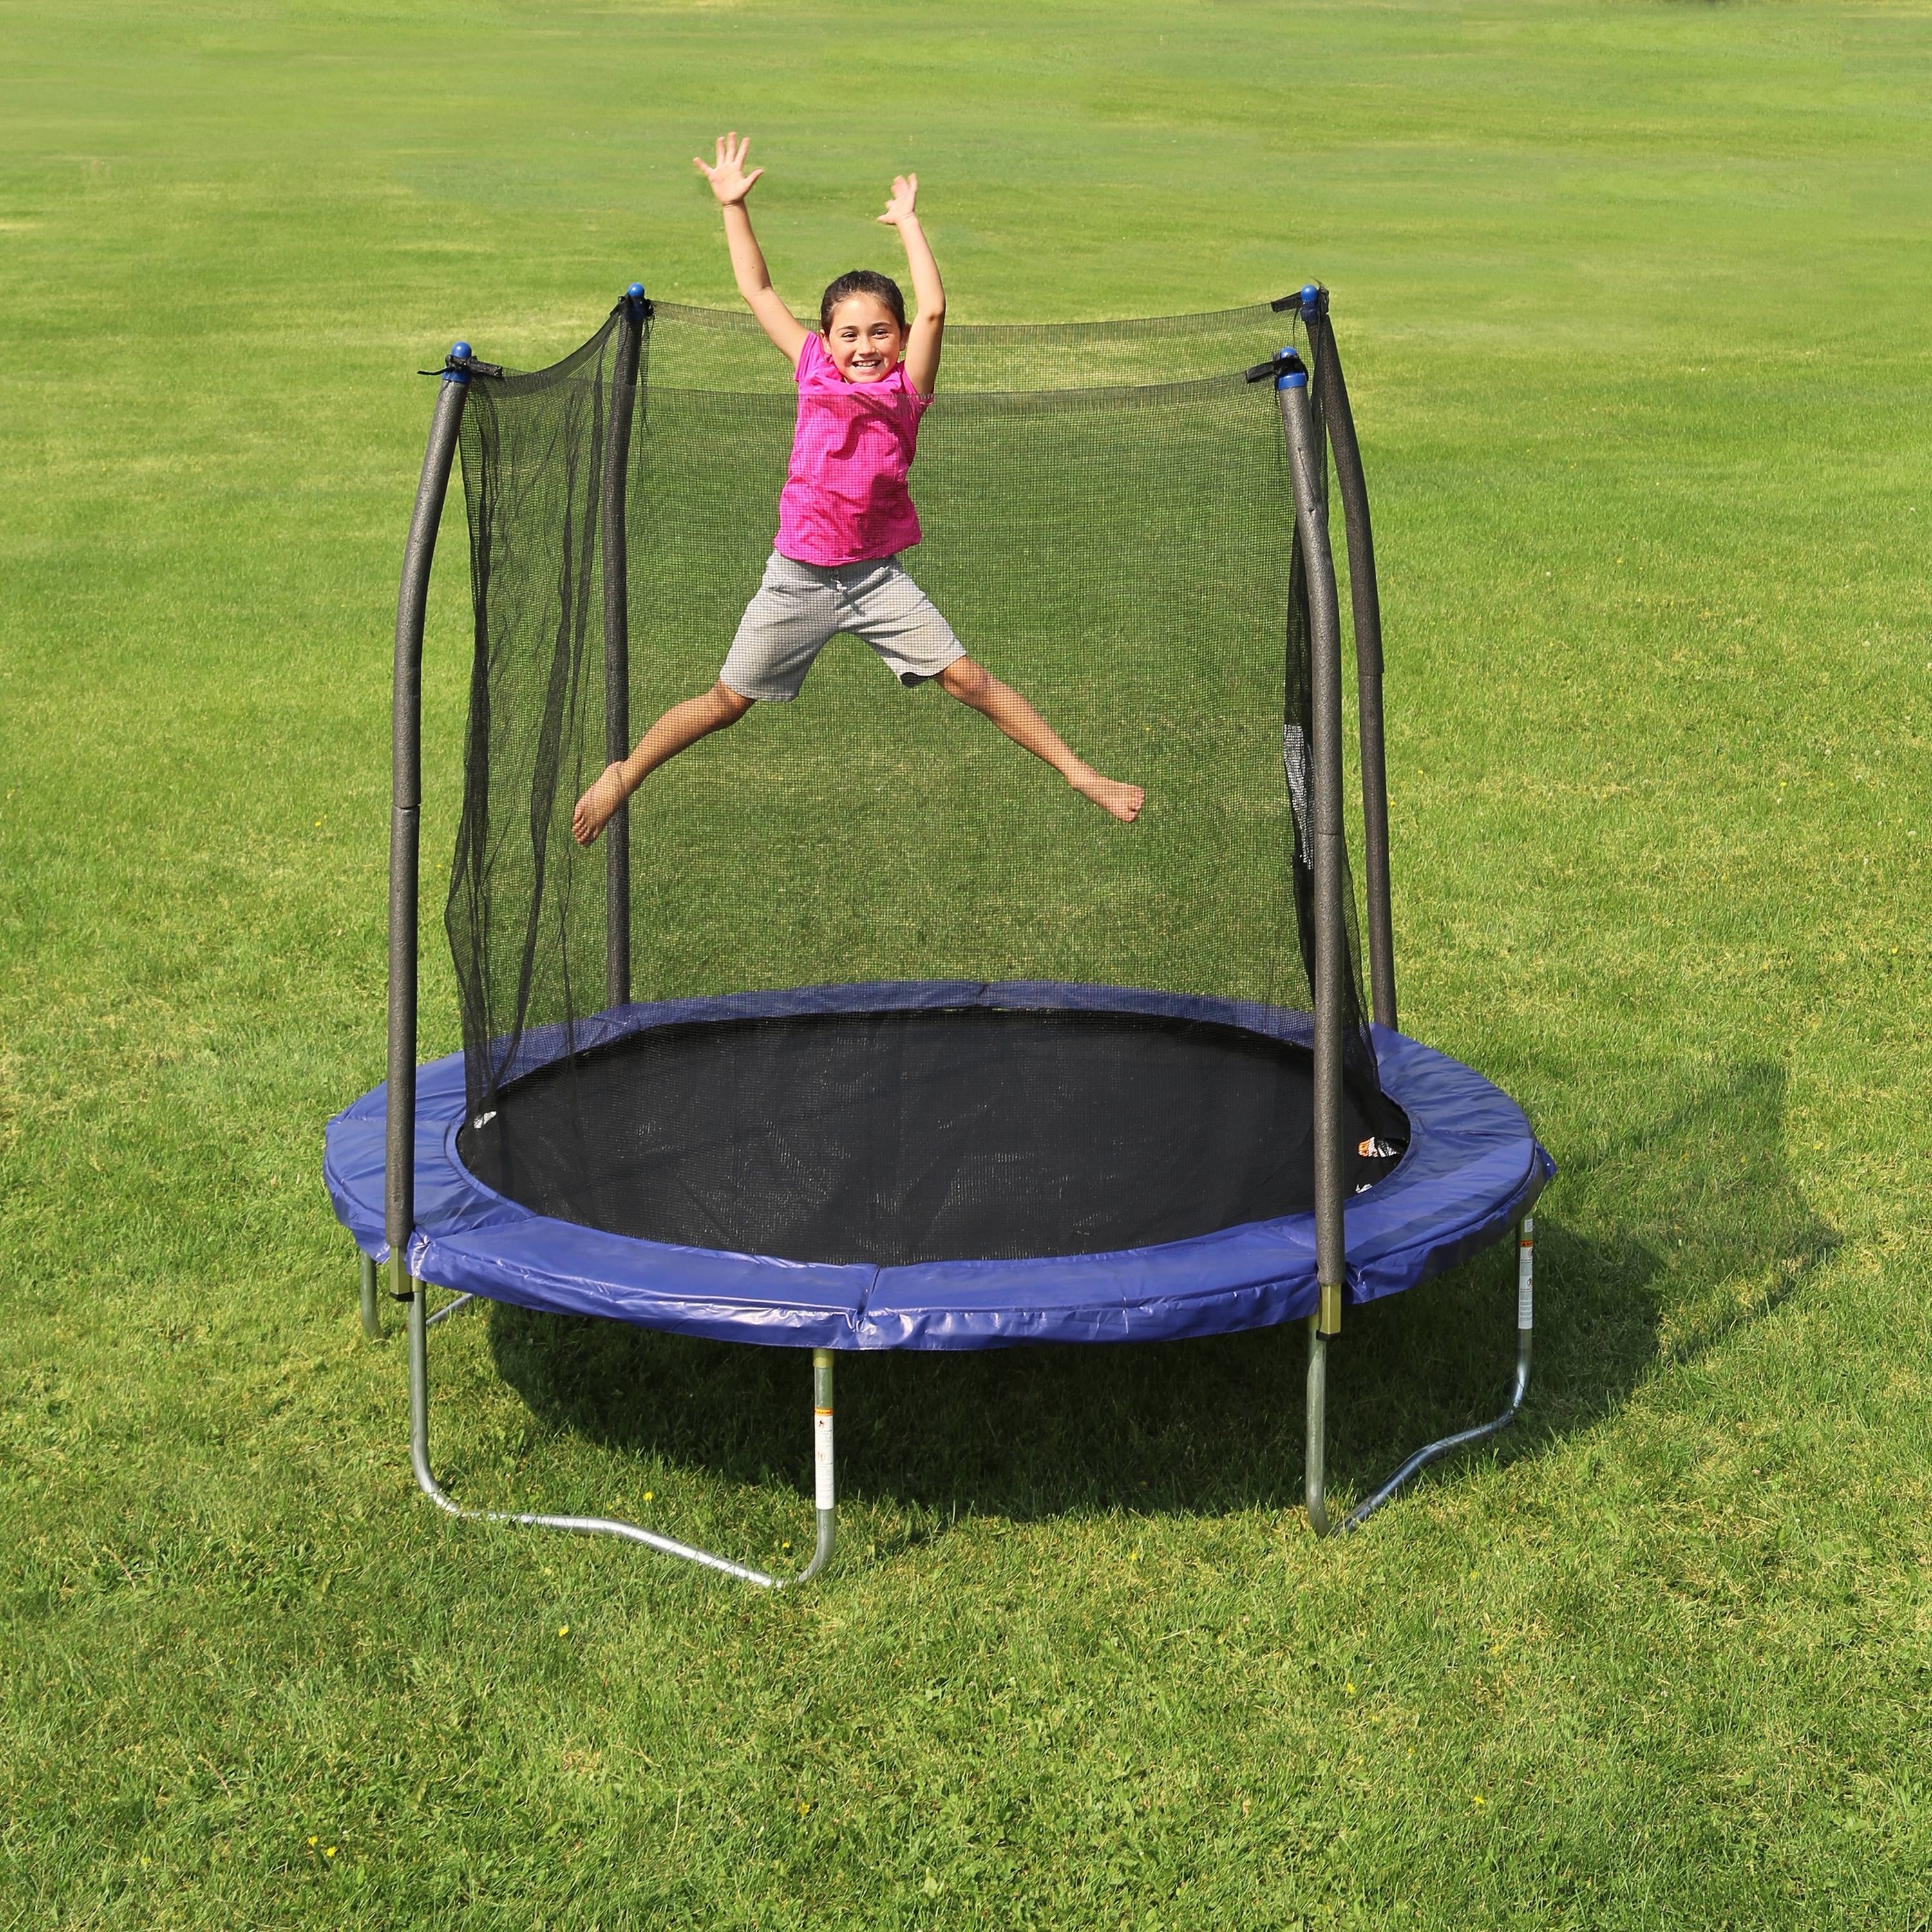 kid jumping on the trampoline with safety net